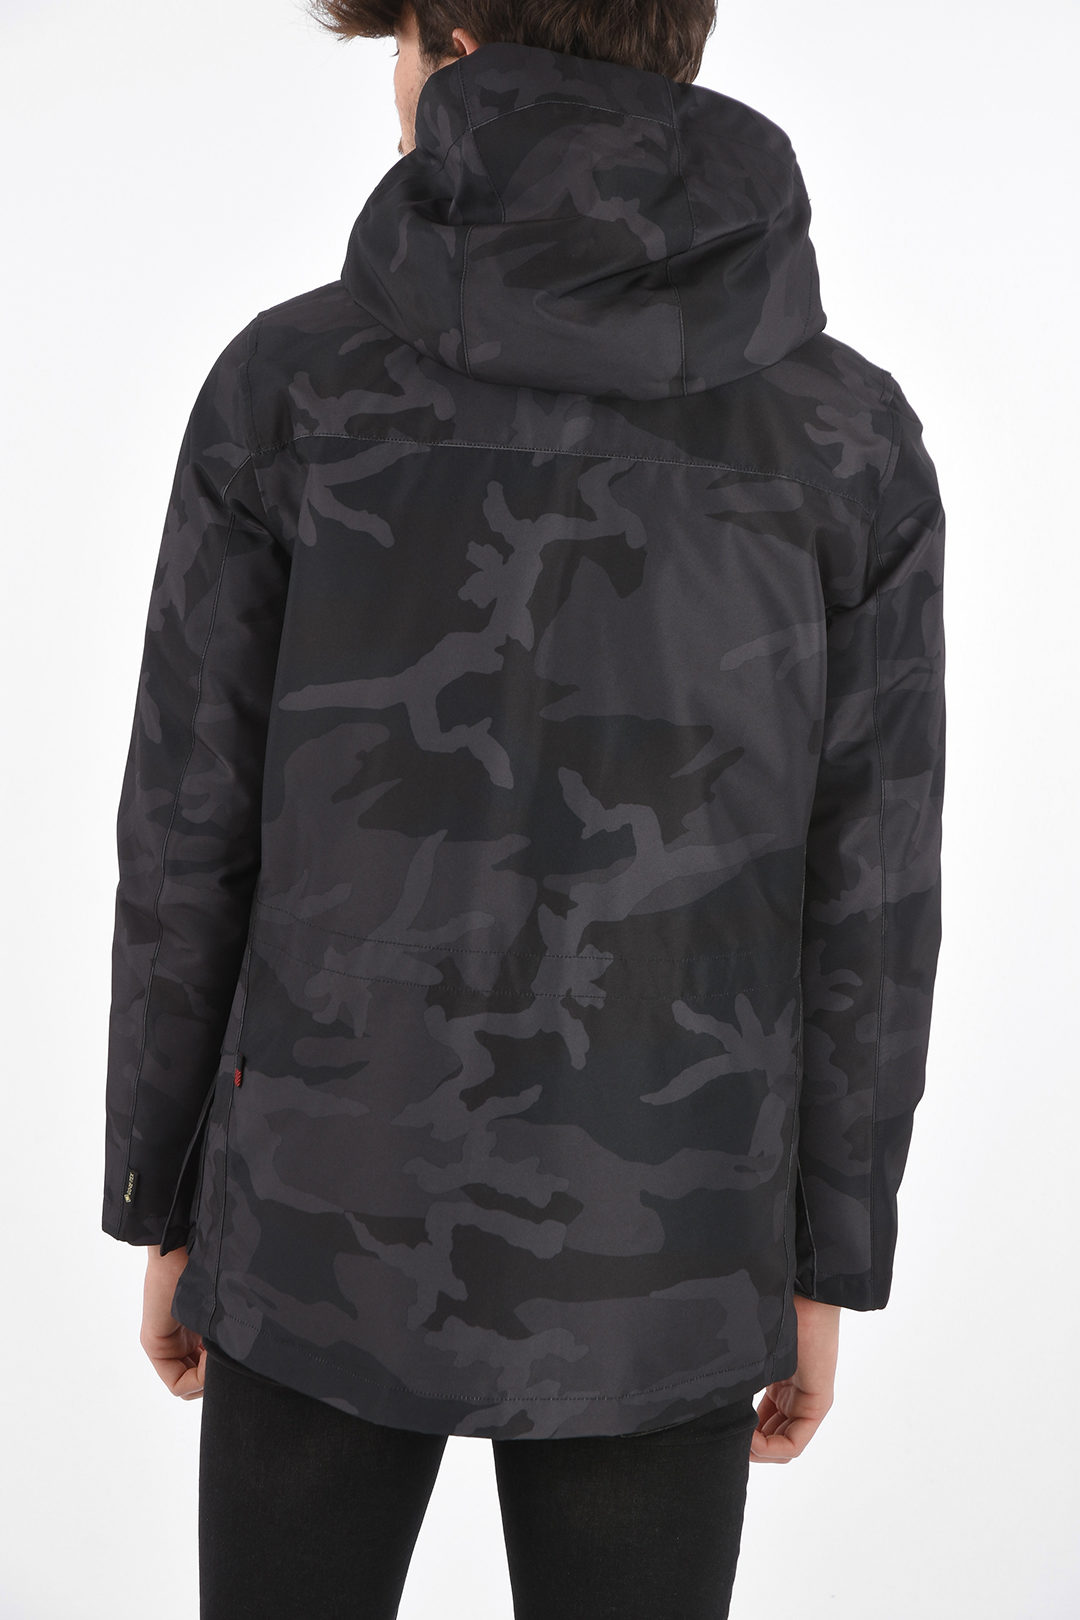 Woolrich camouflage down jacket with hood men - Glamood Outlet